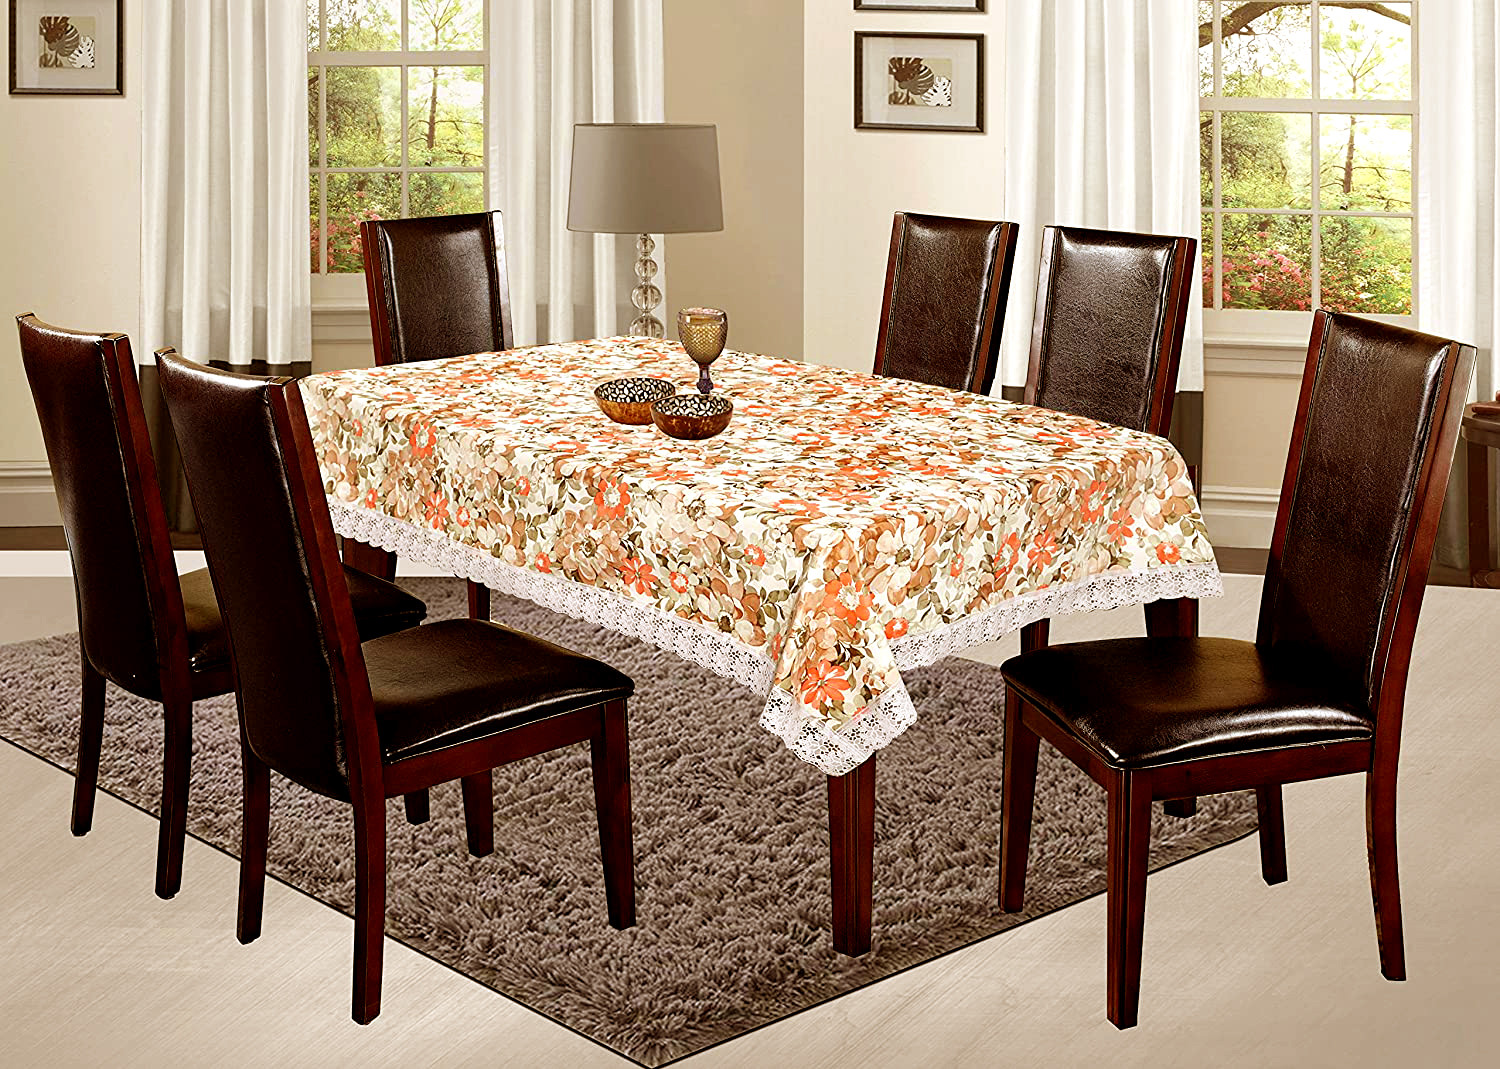 Kuber Industries Dining Table Cover Tablecloth Waterproof Protector 6 Seater With Flower Printed, 60 X 90 Inches Rectangle (Cream)